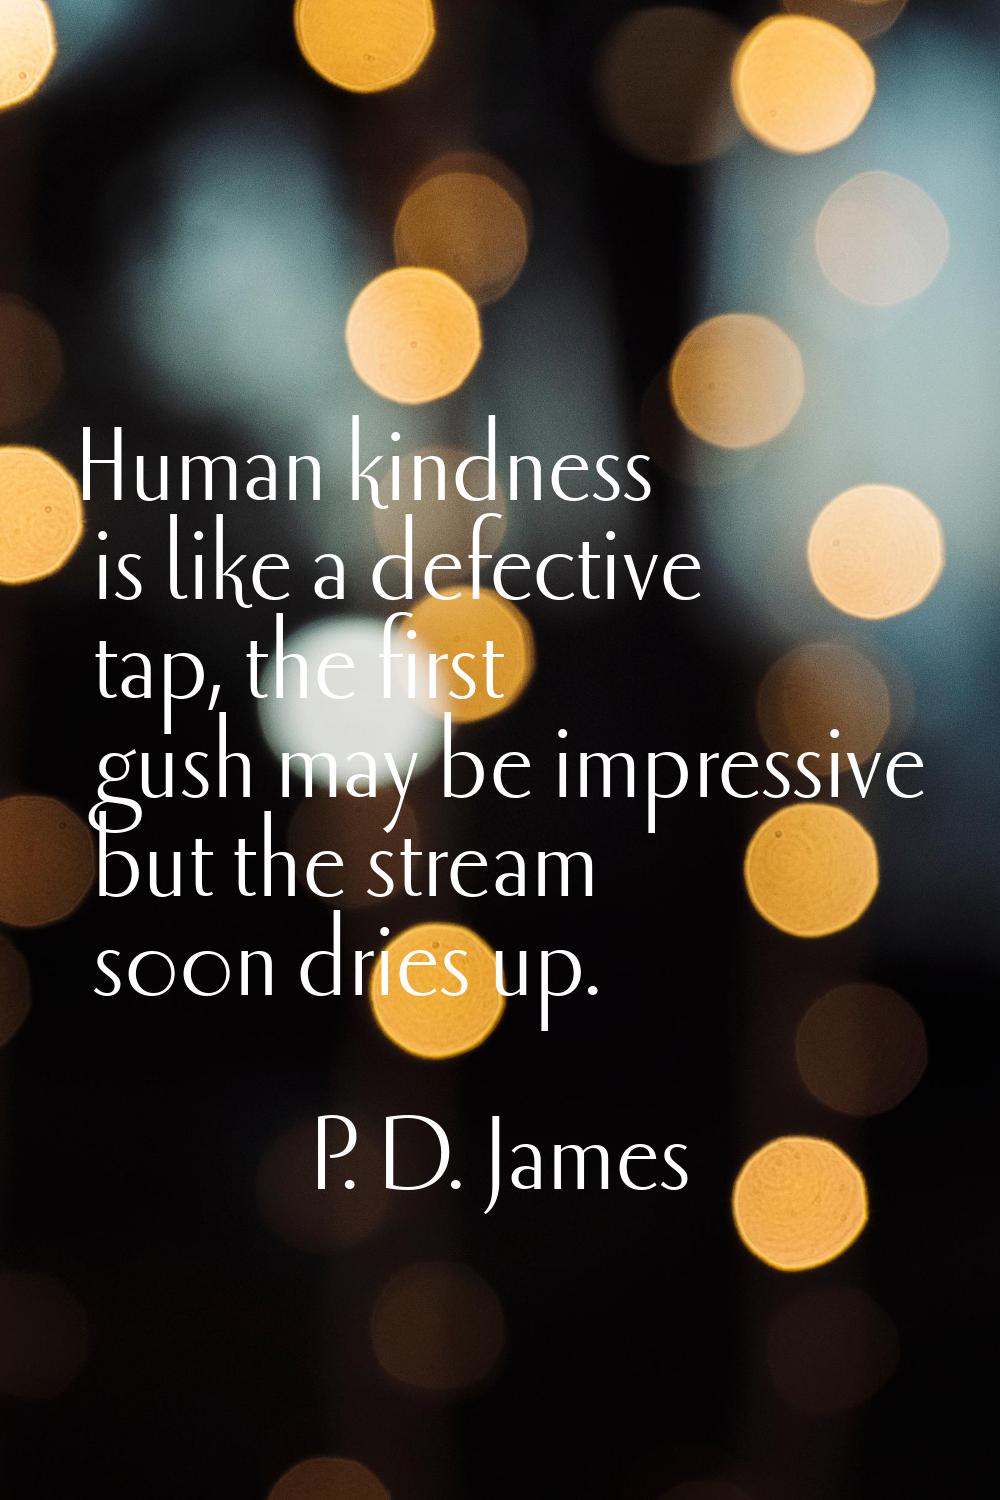 Human kindness is like a defective tap, the first gush may be impressive but the stream soon dries 